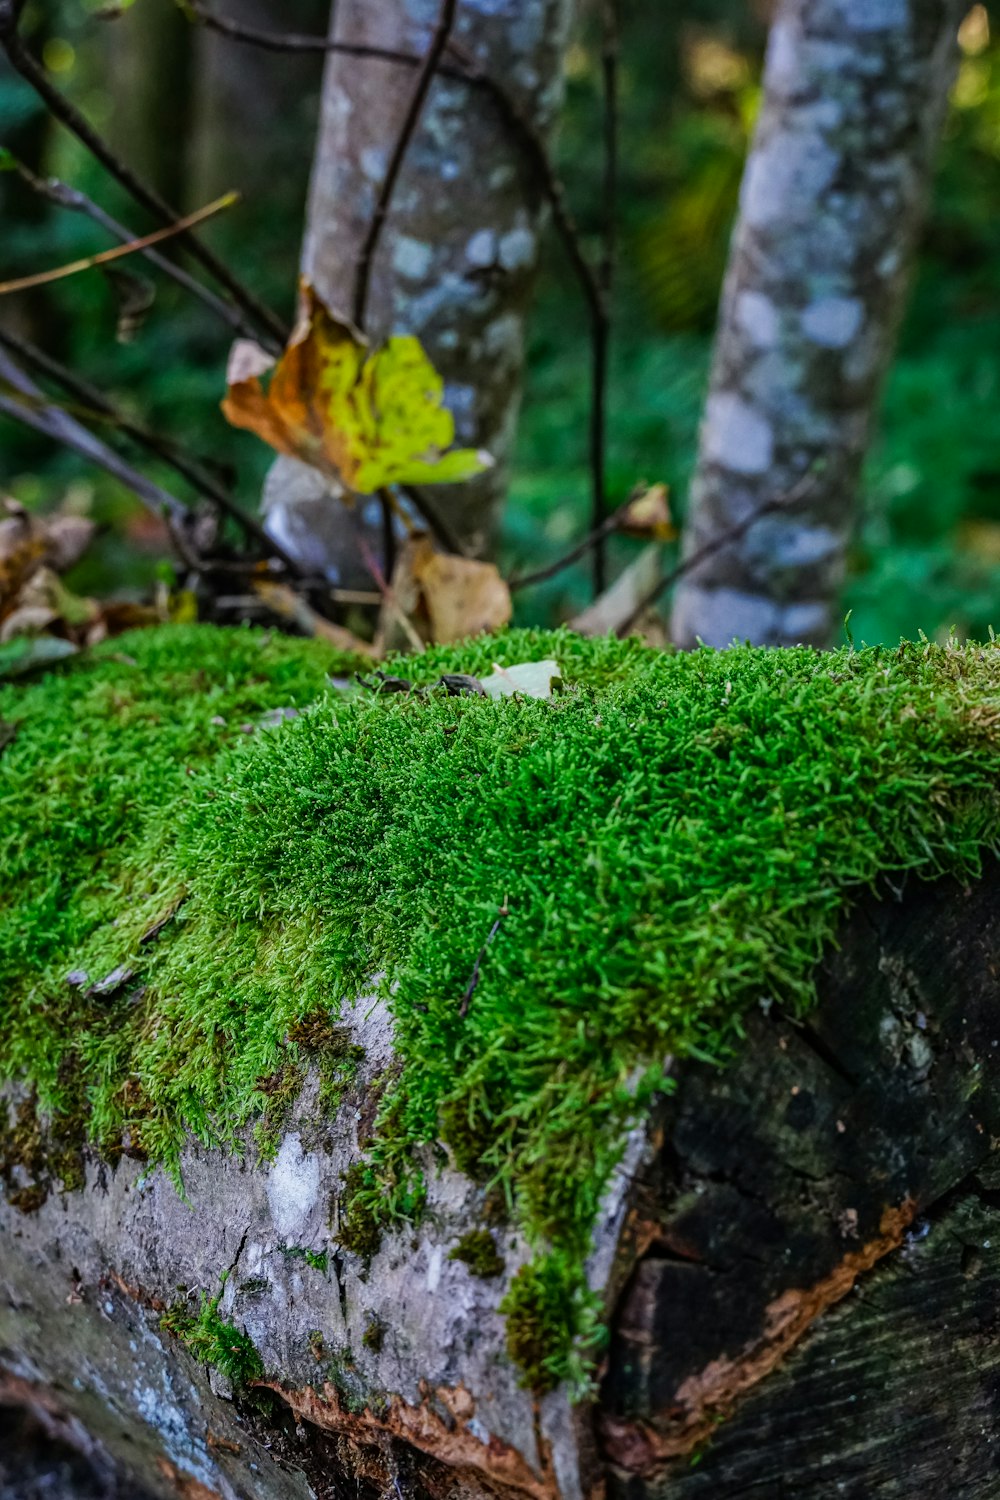 a tree stump with moss growing on it